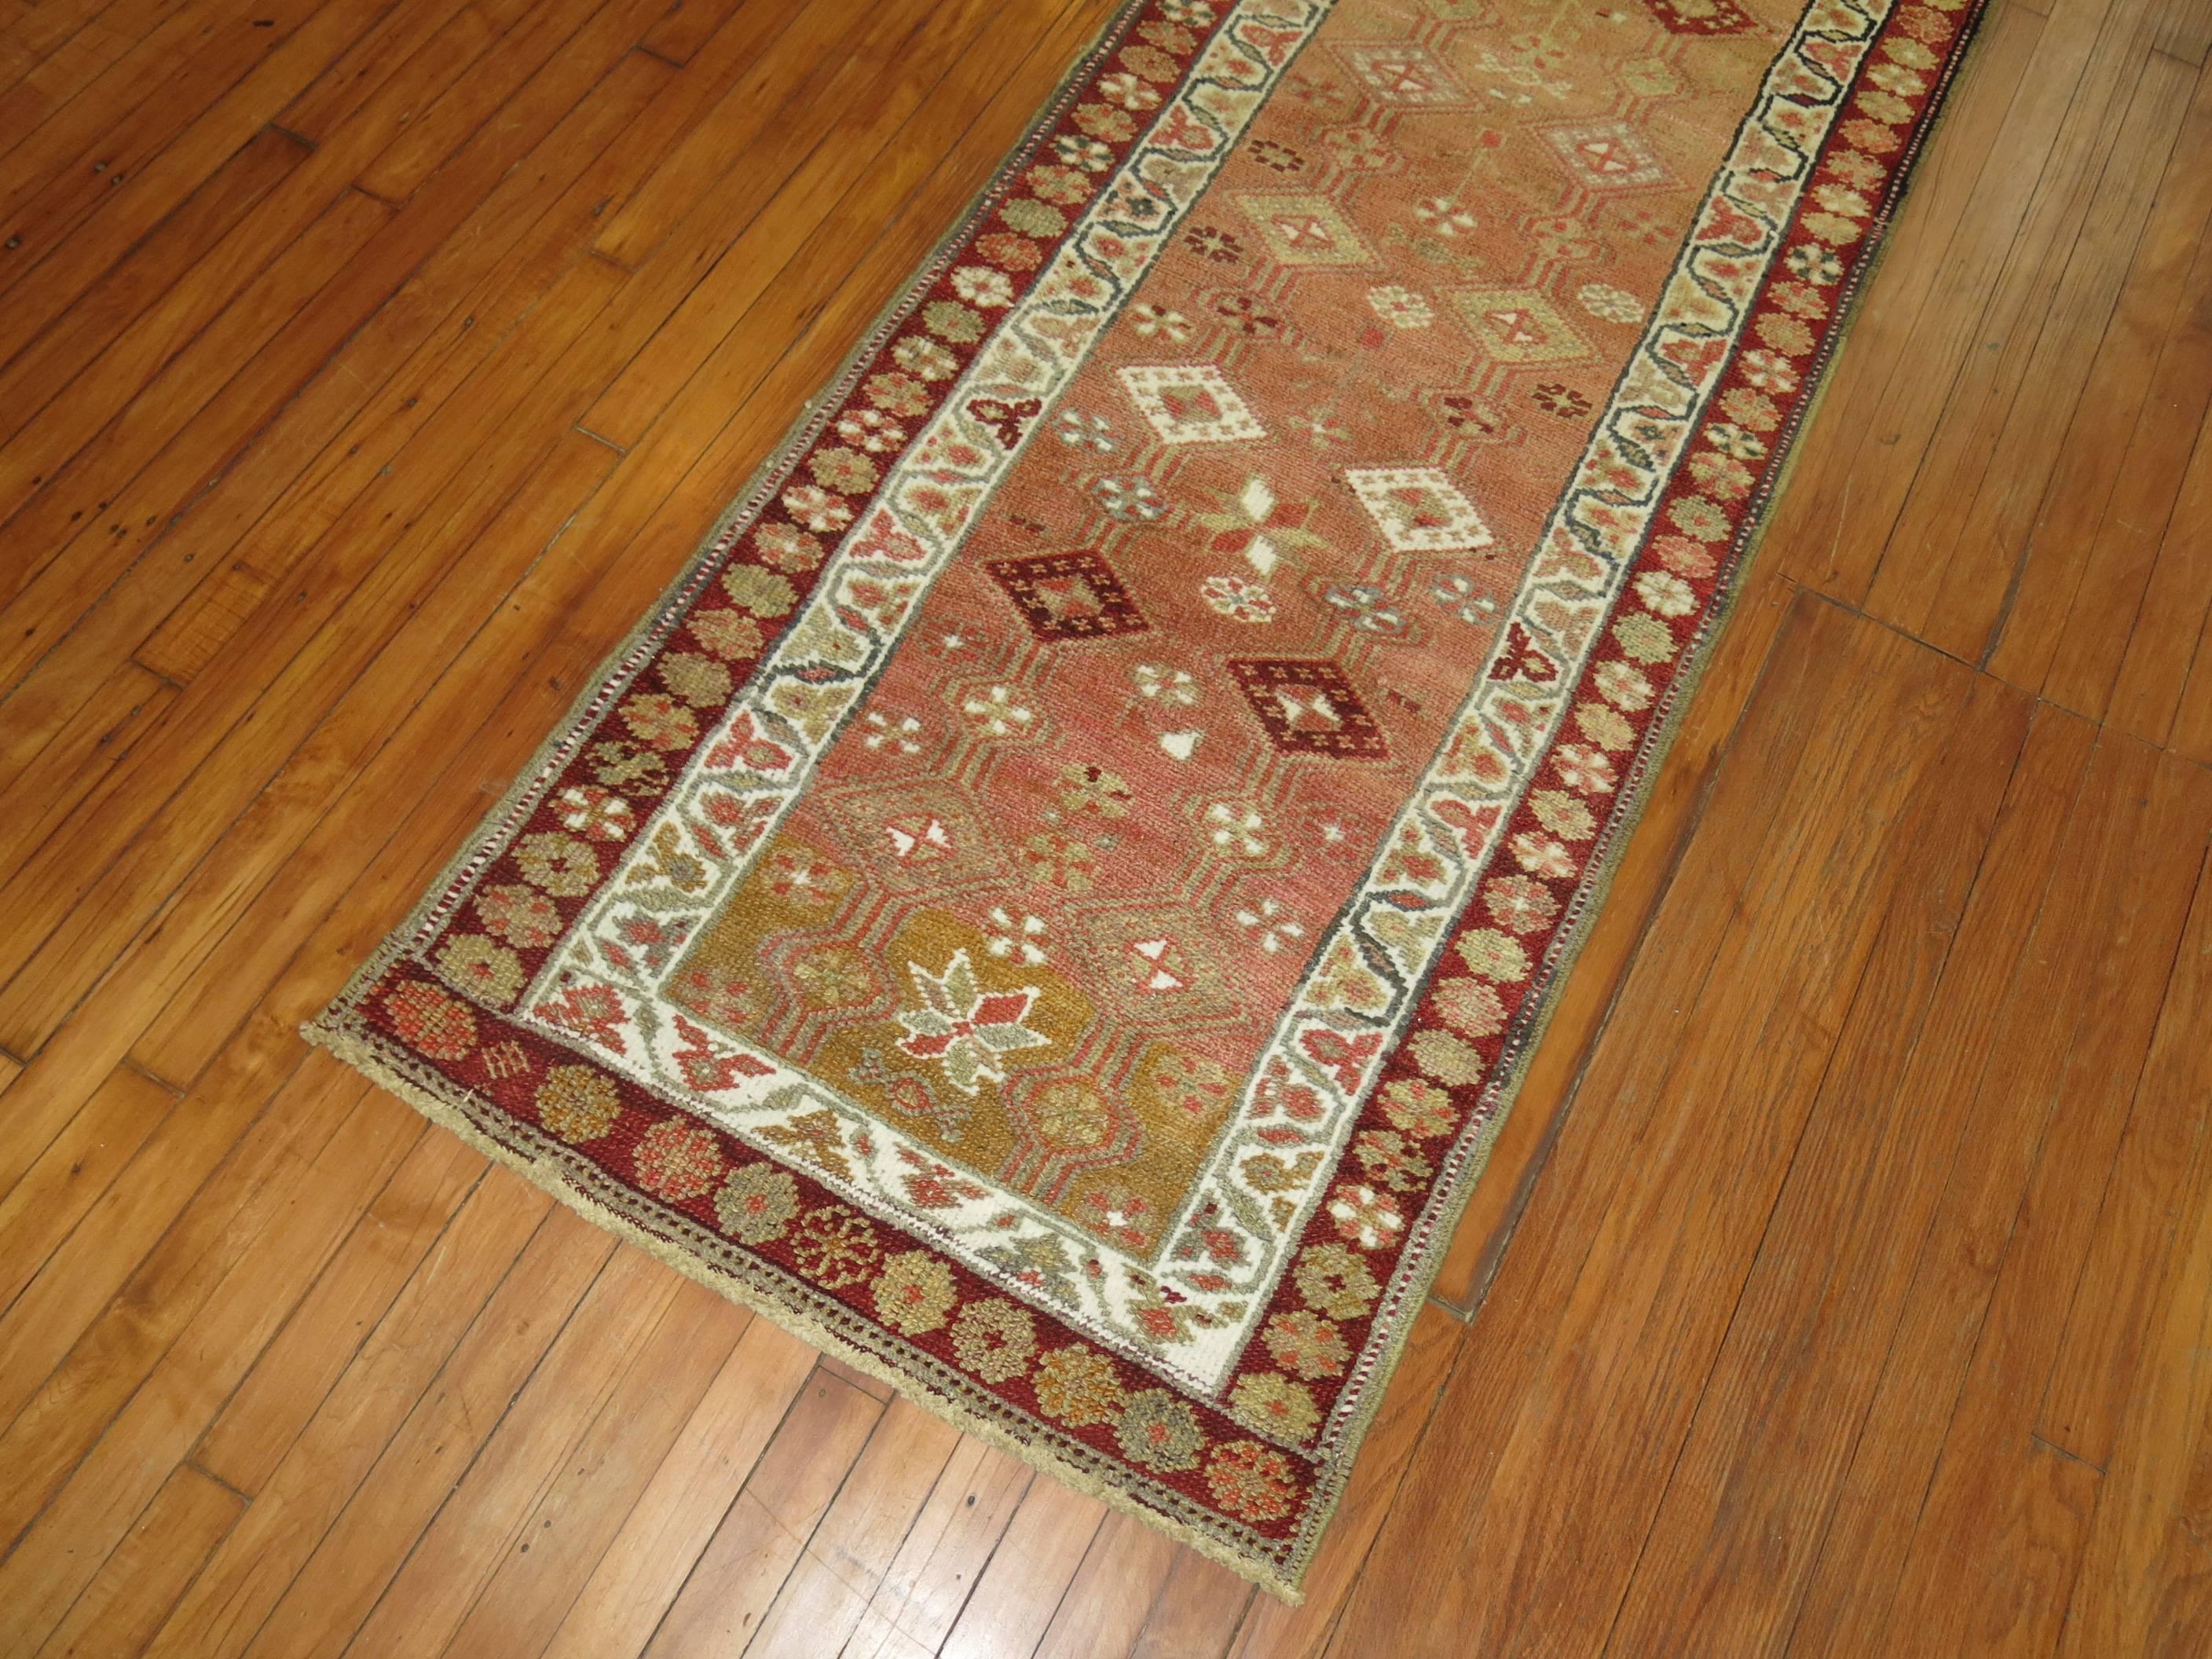 An abrashed Turkish Anatolian runner from the middle of the 20th century.
Abrash is a term used to describe color variations found in hand-knotted oriental rugs. Although such inconsistencies may be perceived as flaws in coloration, Abrash gives a